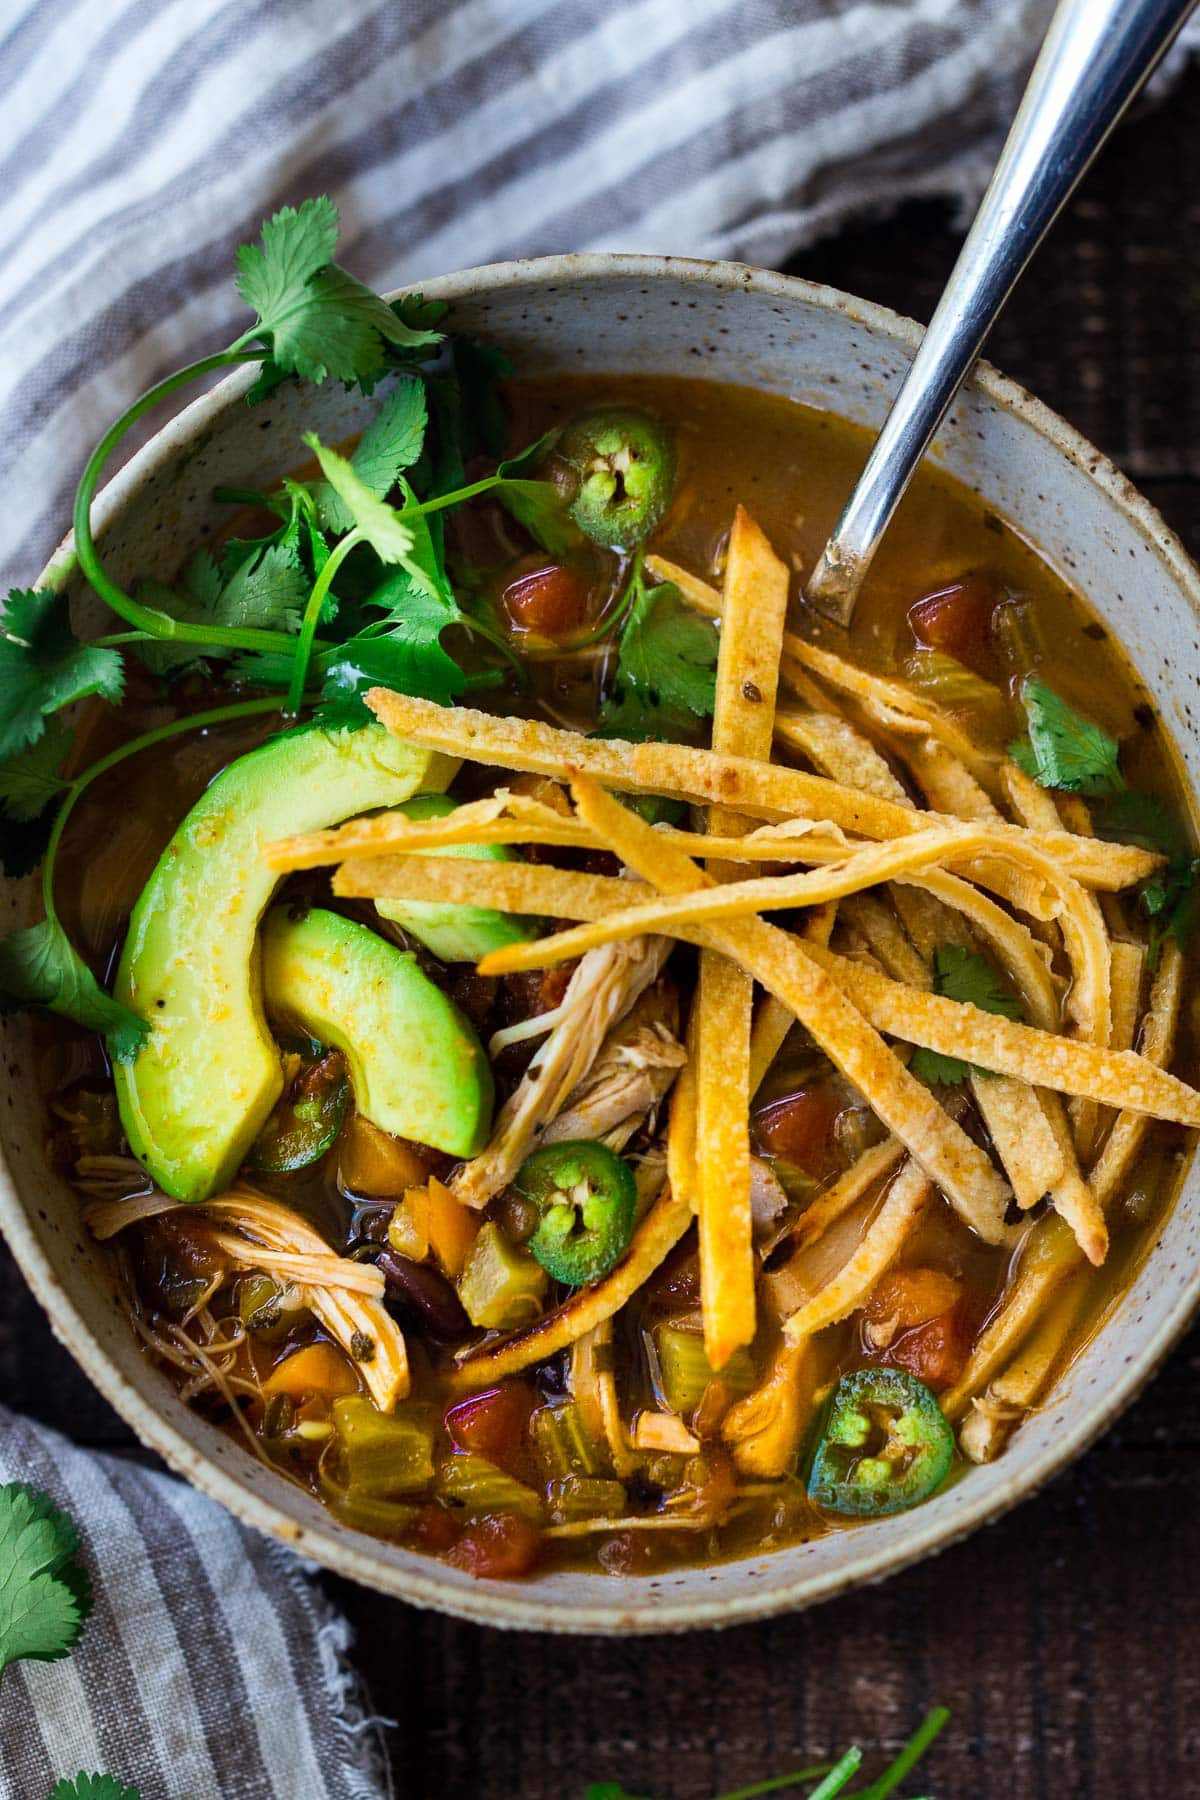 12 Canned Soups You Should Always Have In Your Pantry